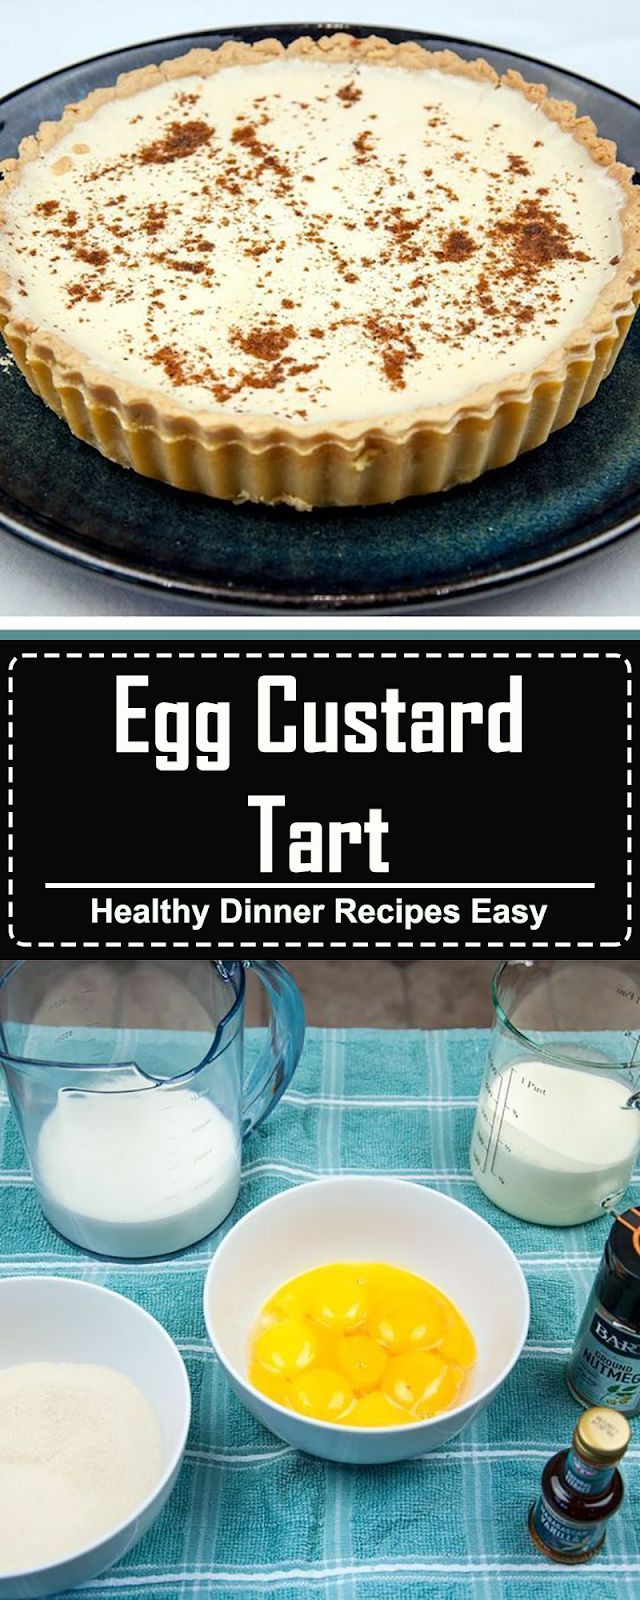 Egg custard tart. What a delicious dessert. We love this simple recipe in our house. Always a family favourite. Easy to make, and the kids can help! Yum!! | theyumyumclub.com #eggcustard #delicious #foodpics #dessert #sweet #foodlover #yummy #baking #cus